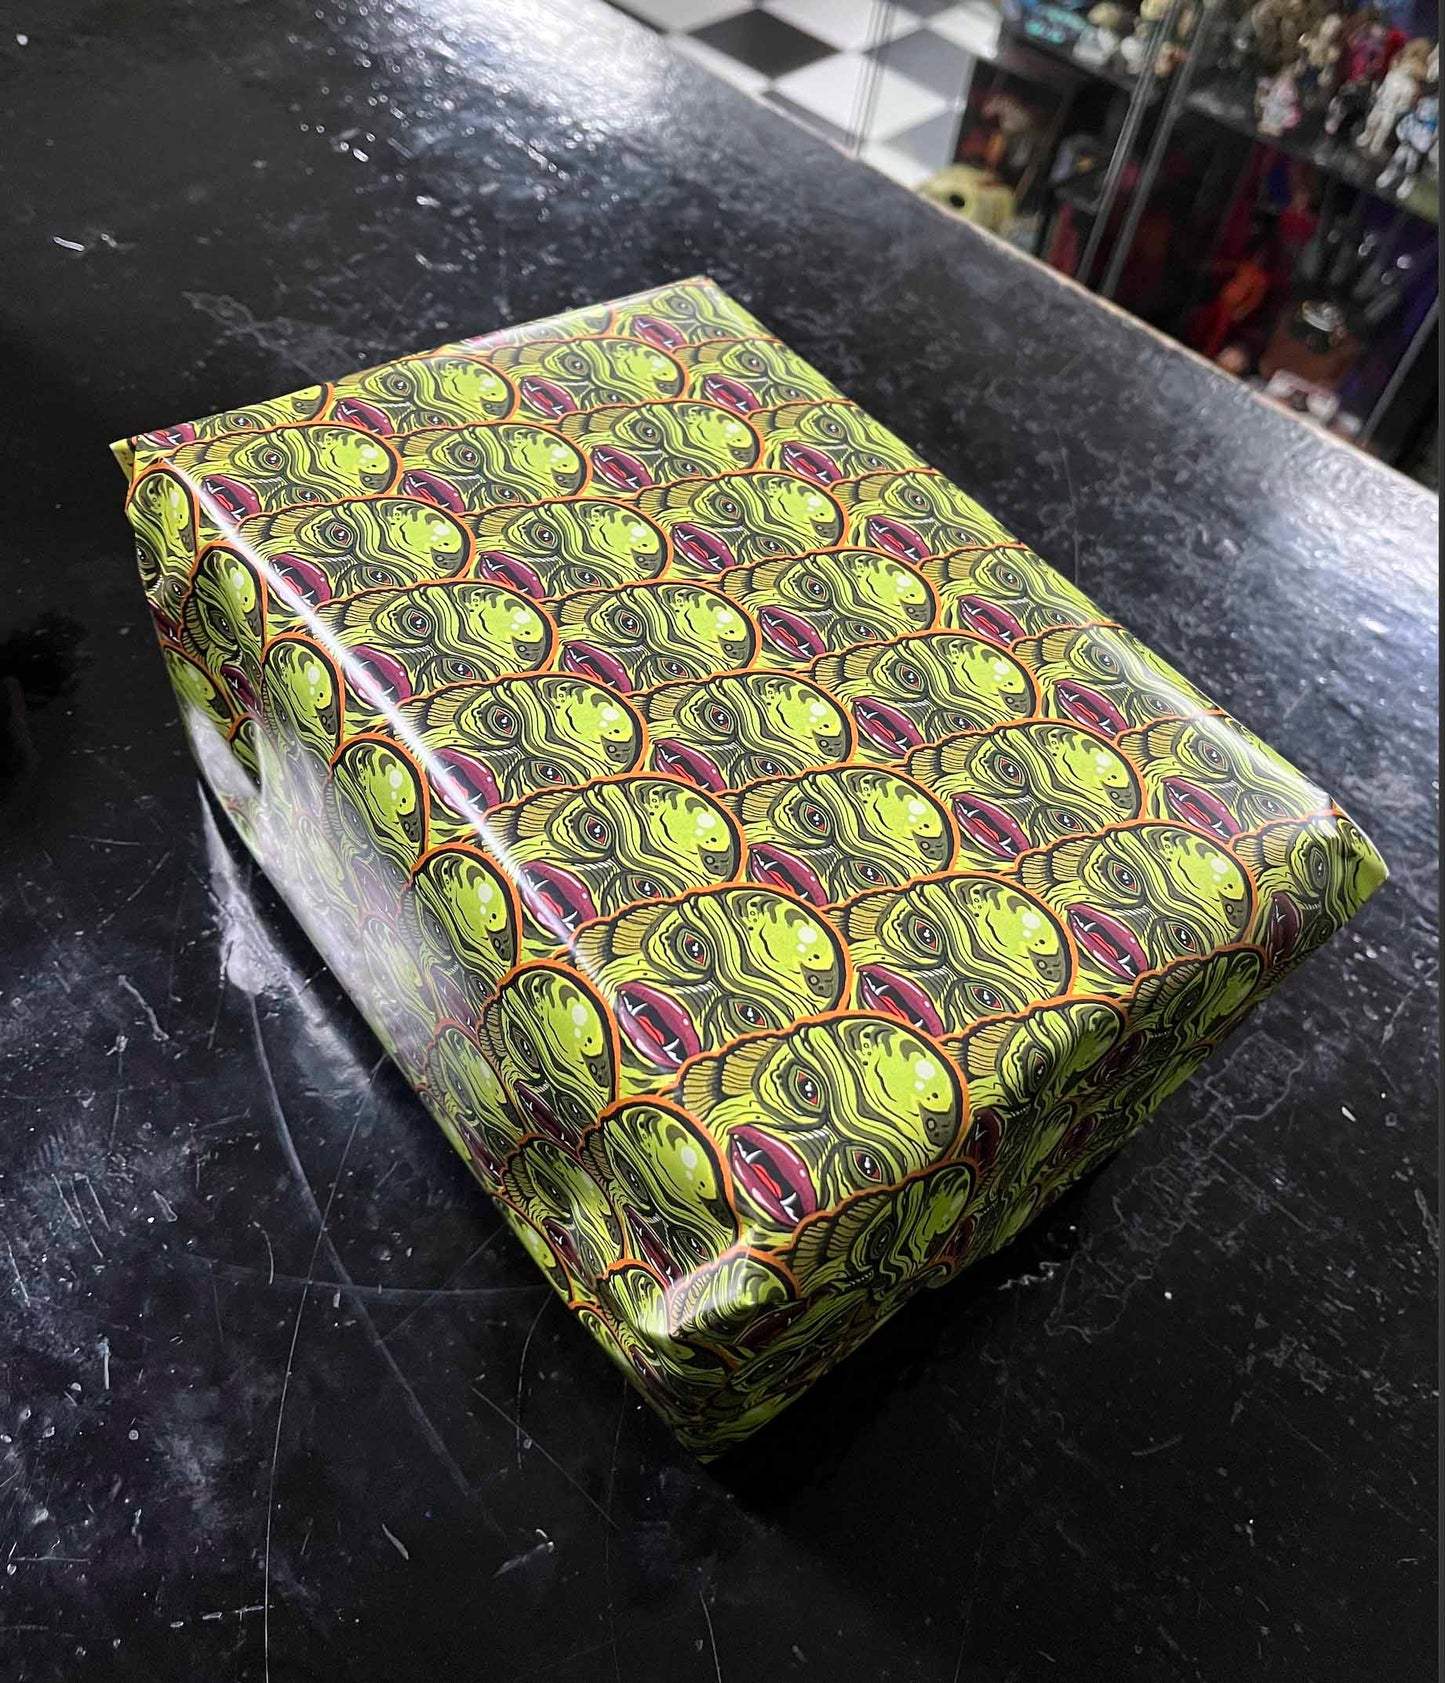 CREATURE FROM THE BLACK LAGOON INSPIRED WRAPPING PAPER